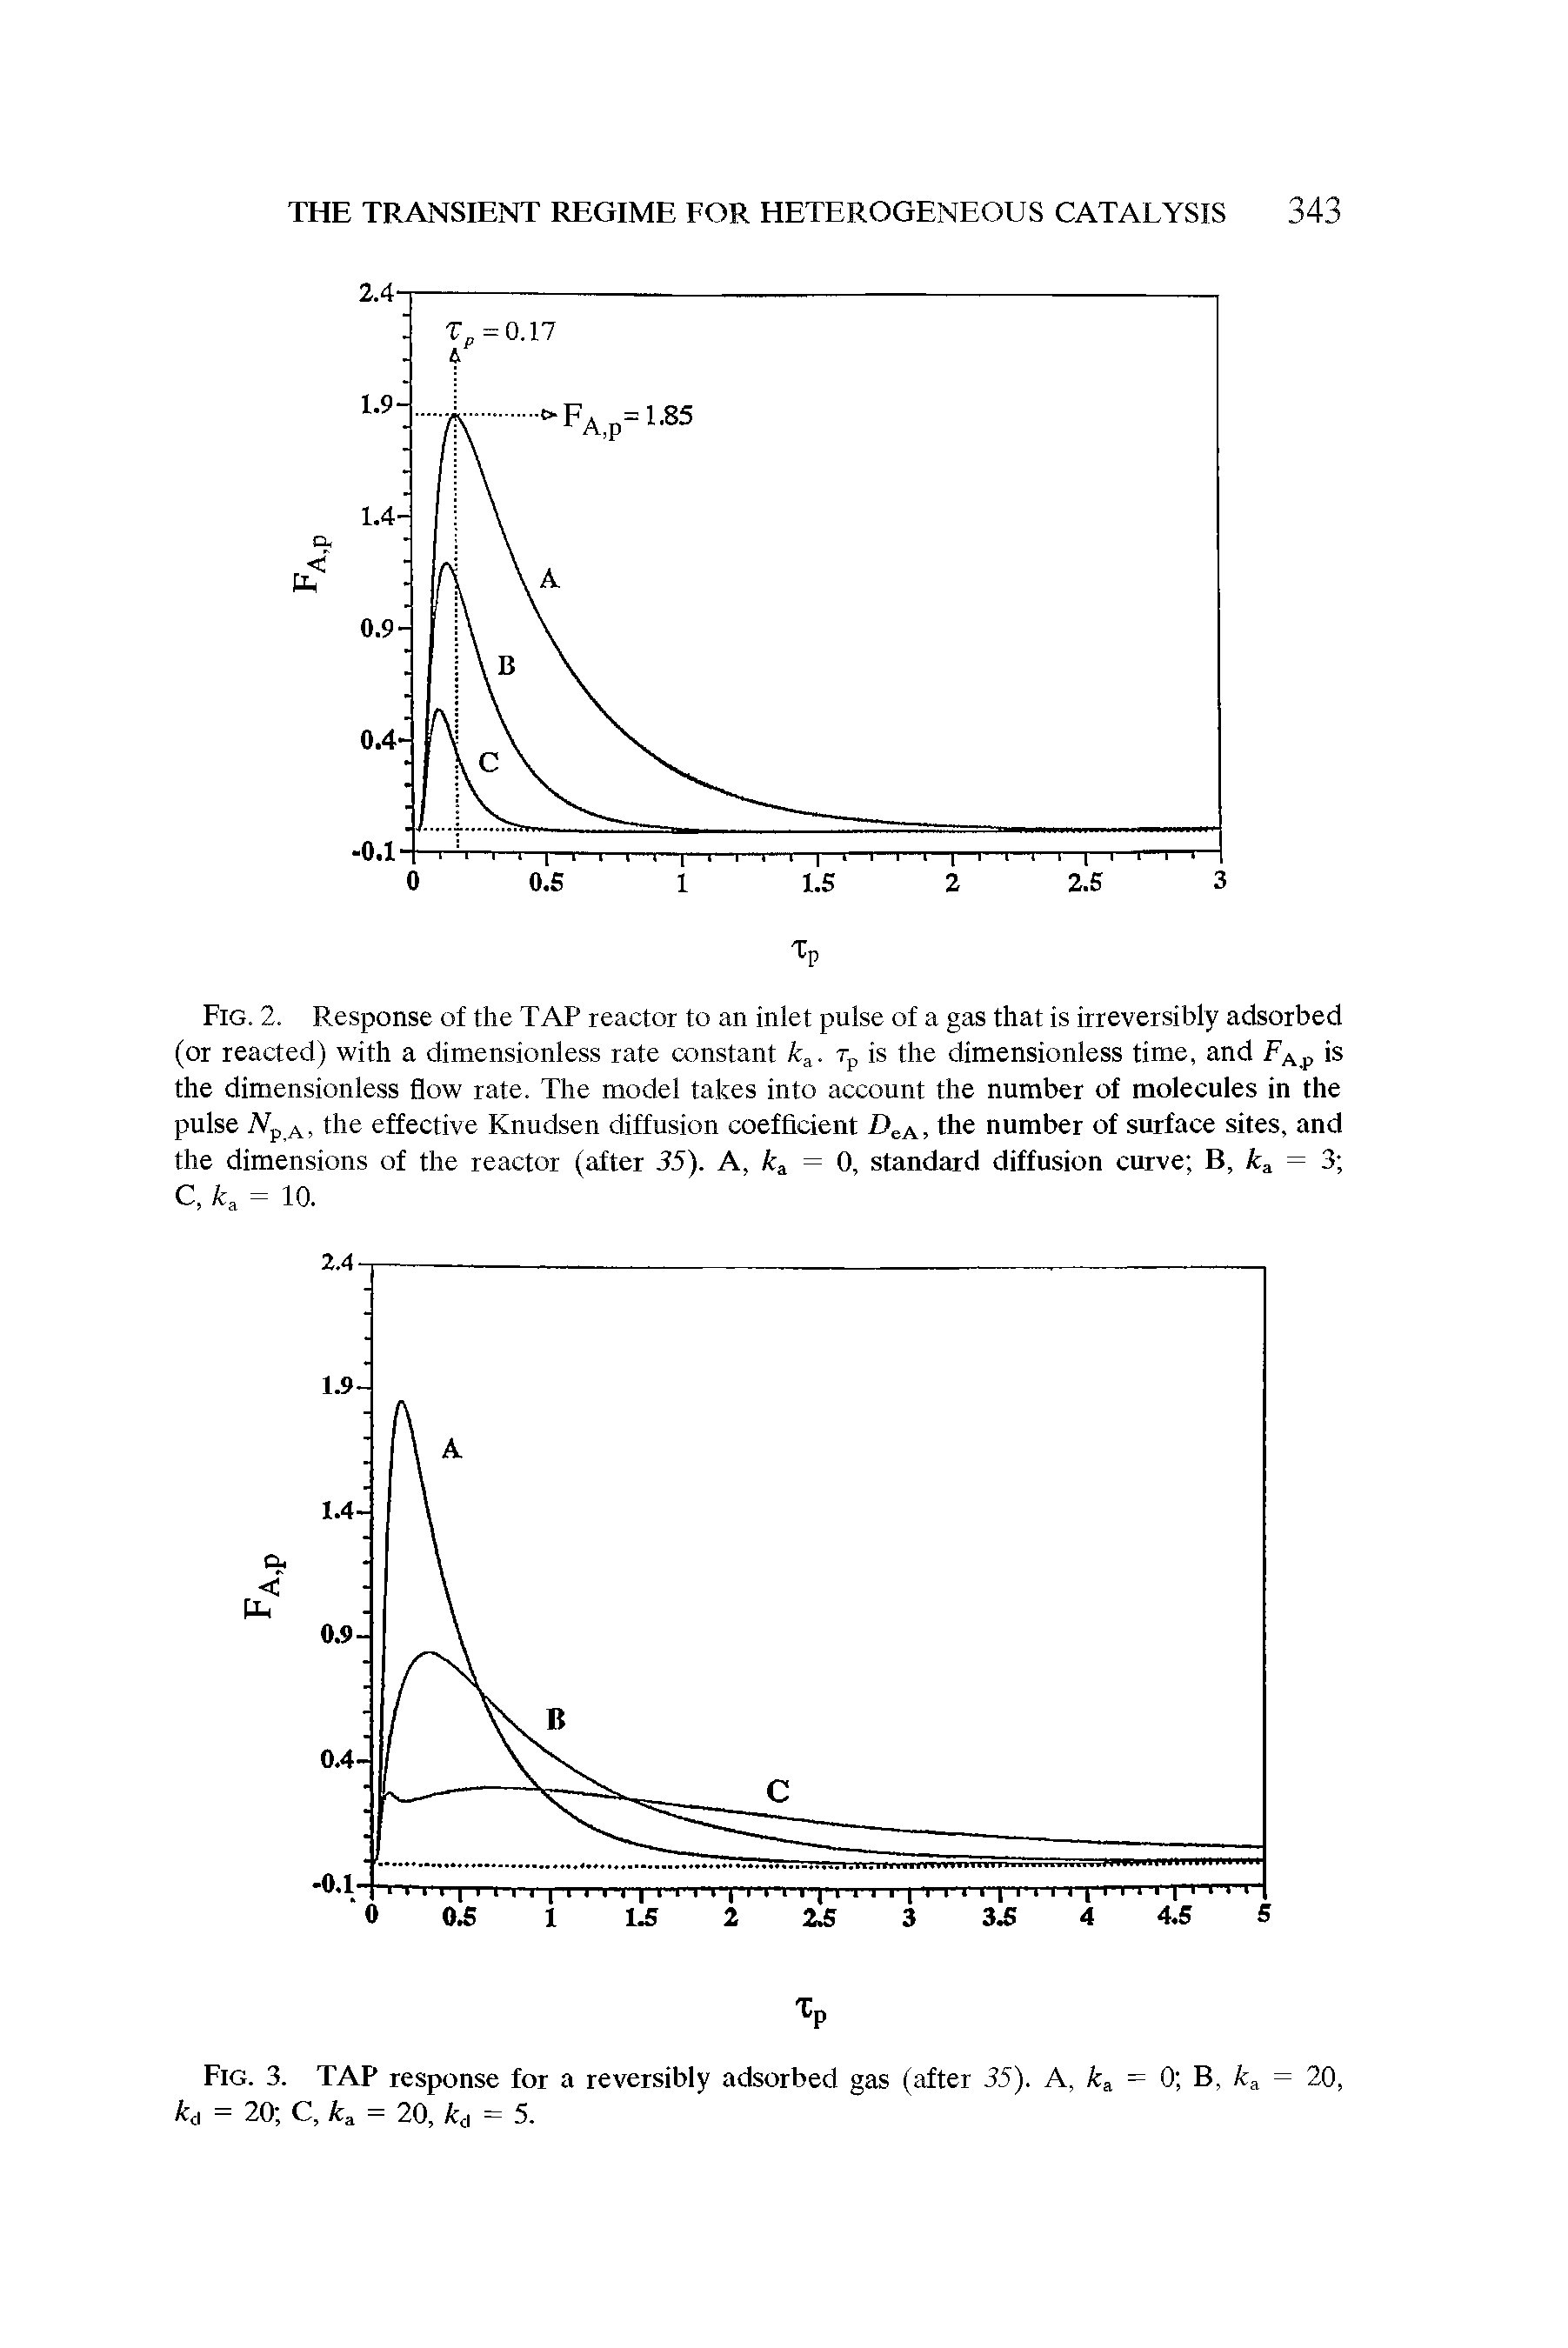 Fig. 2. Response of the TAP reactor to an inlet pulse of a gas that is irreversibly adsorbed (or reacted) with a dimensionless rate constant k. Tp is the dimensionless time, and F p is the dimensionless flow rate. The model takes into account the number of molecules in the pulse A p A, the effective Knudsen diffusion coefficient DeA, the number of surface sites, and the dimensions of the reactor (after 55). A, = 0, standard diffusion curve B, = 3 C, U = 10.